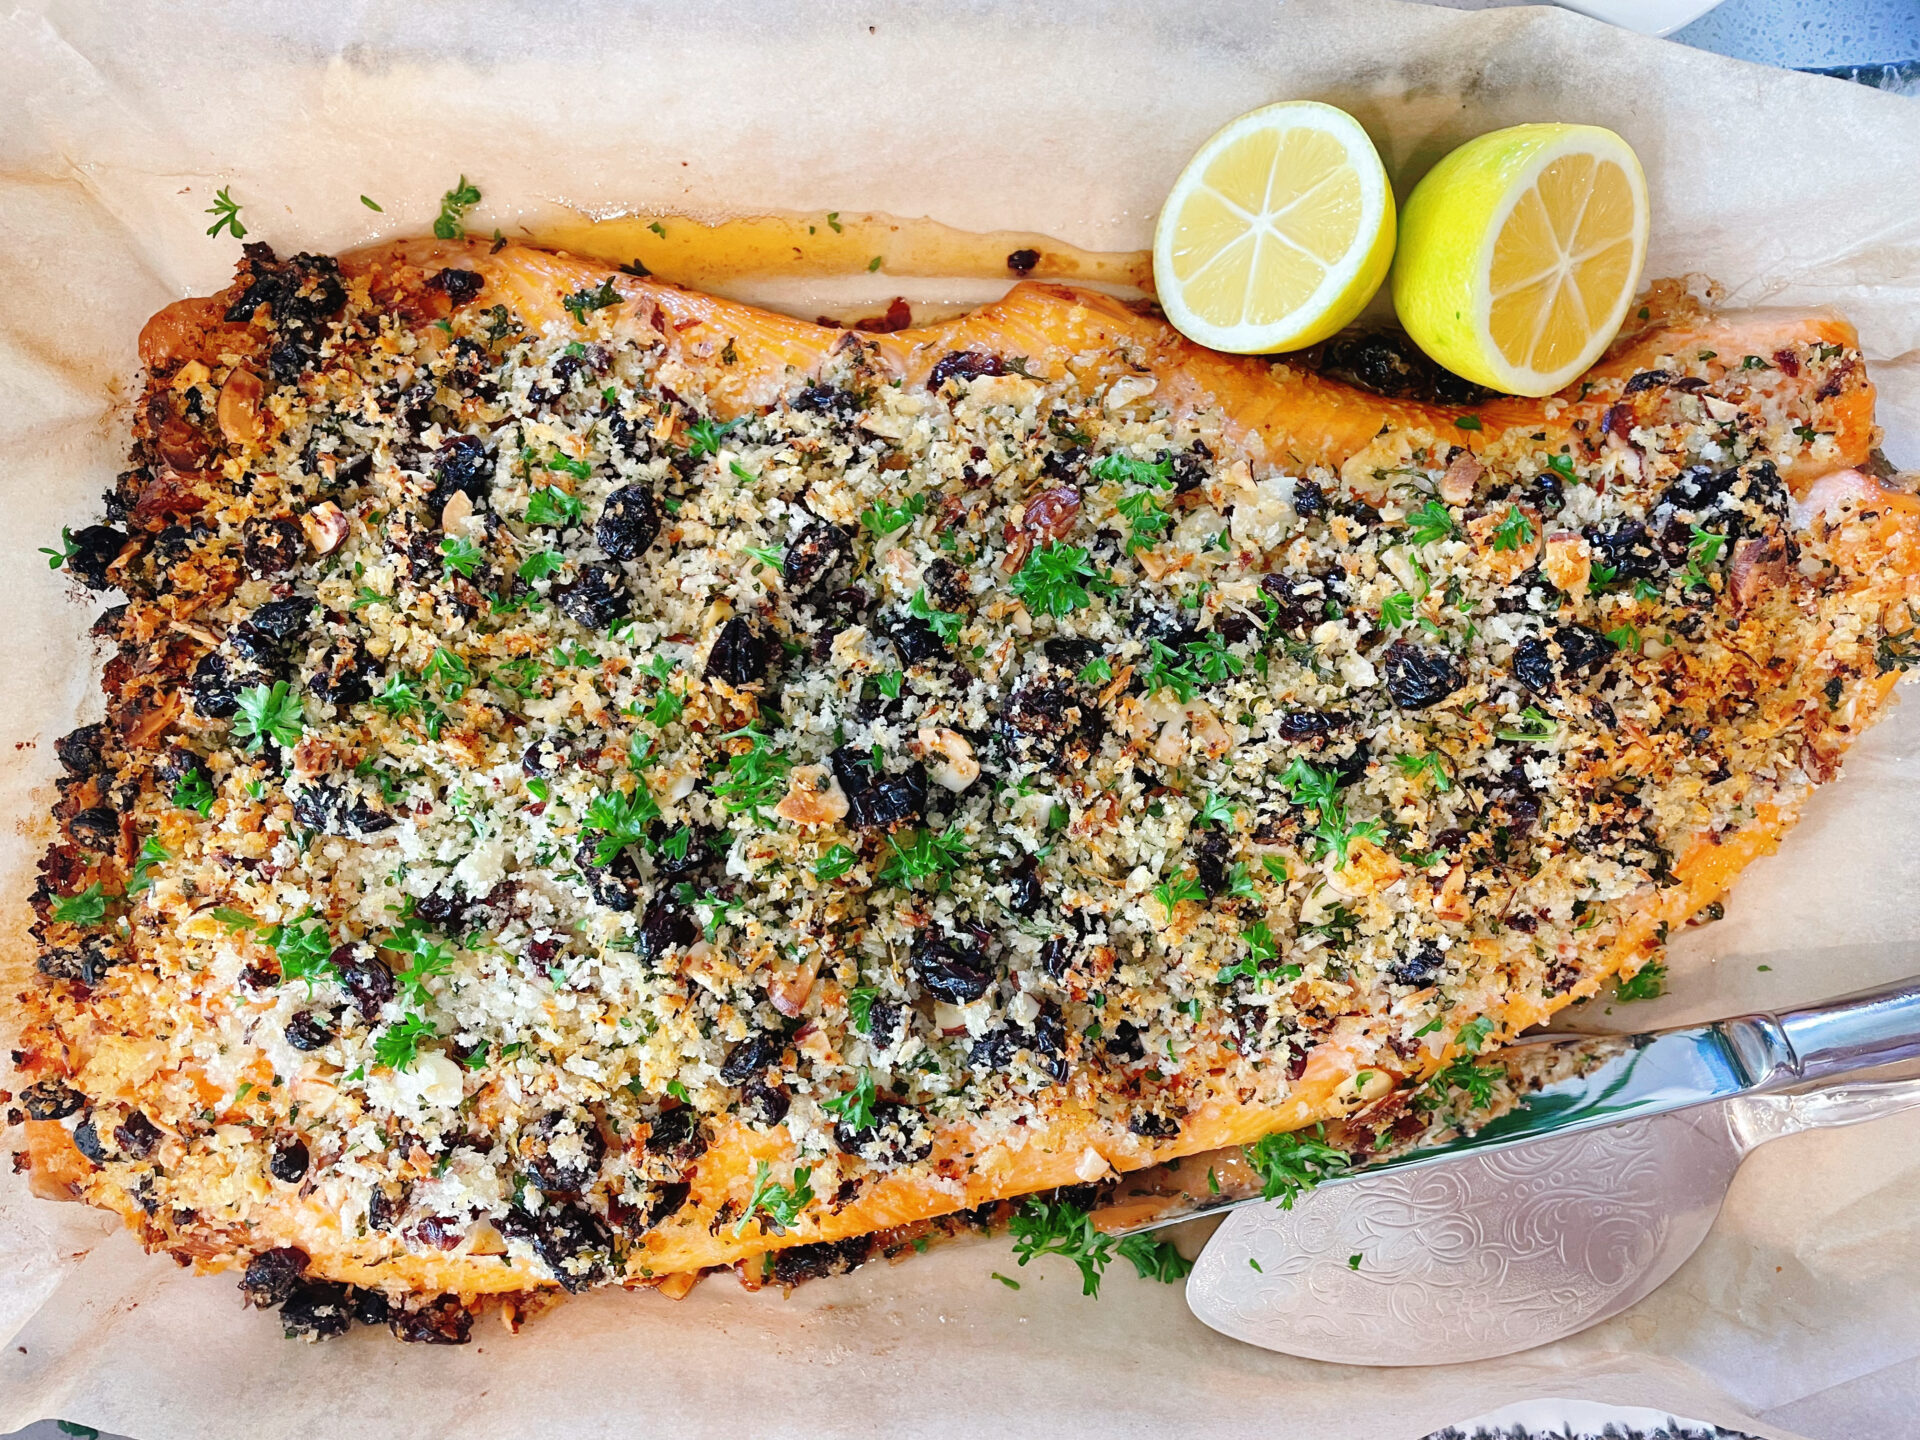 Side of salmon with a cranberry and almond crust